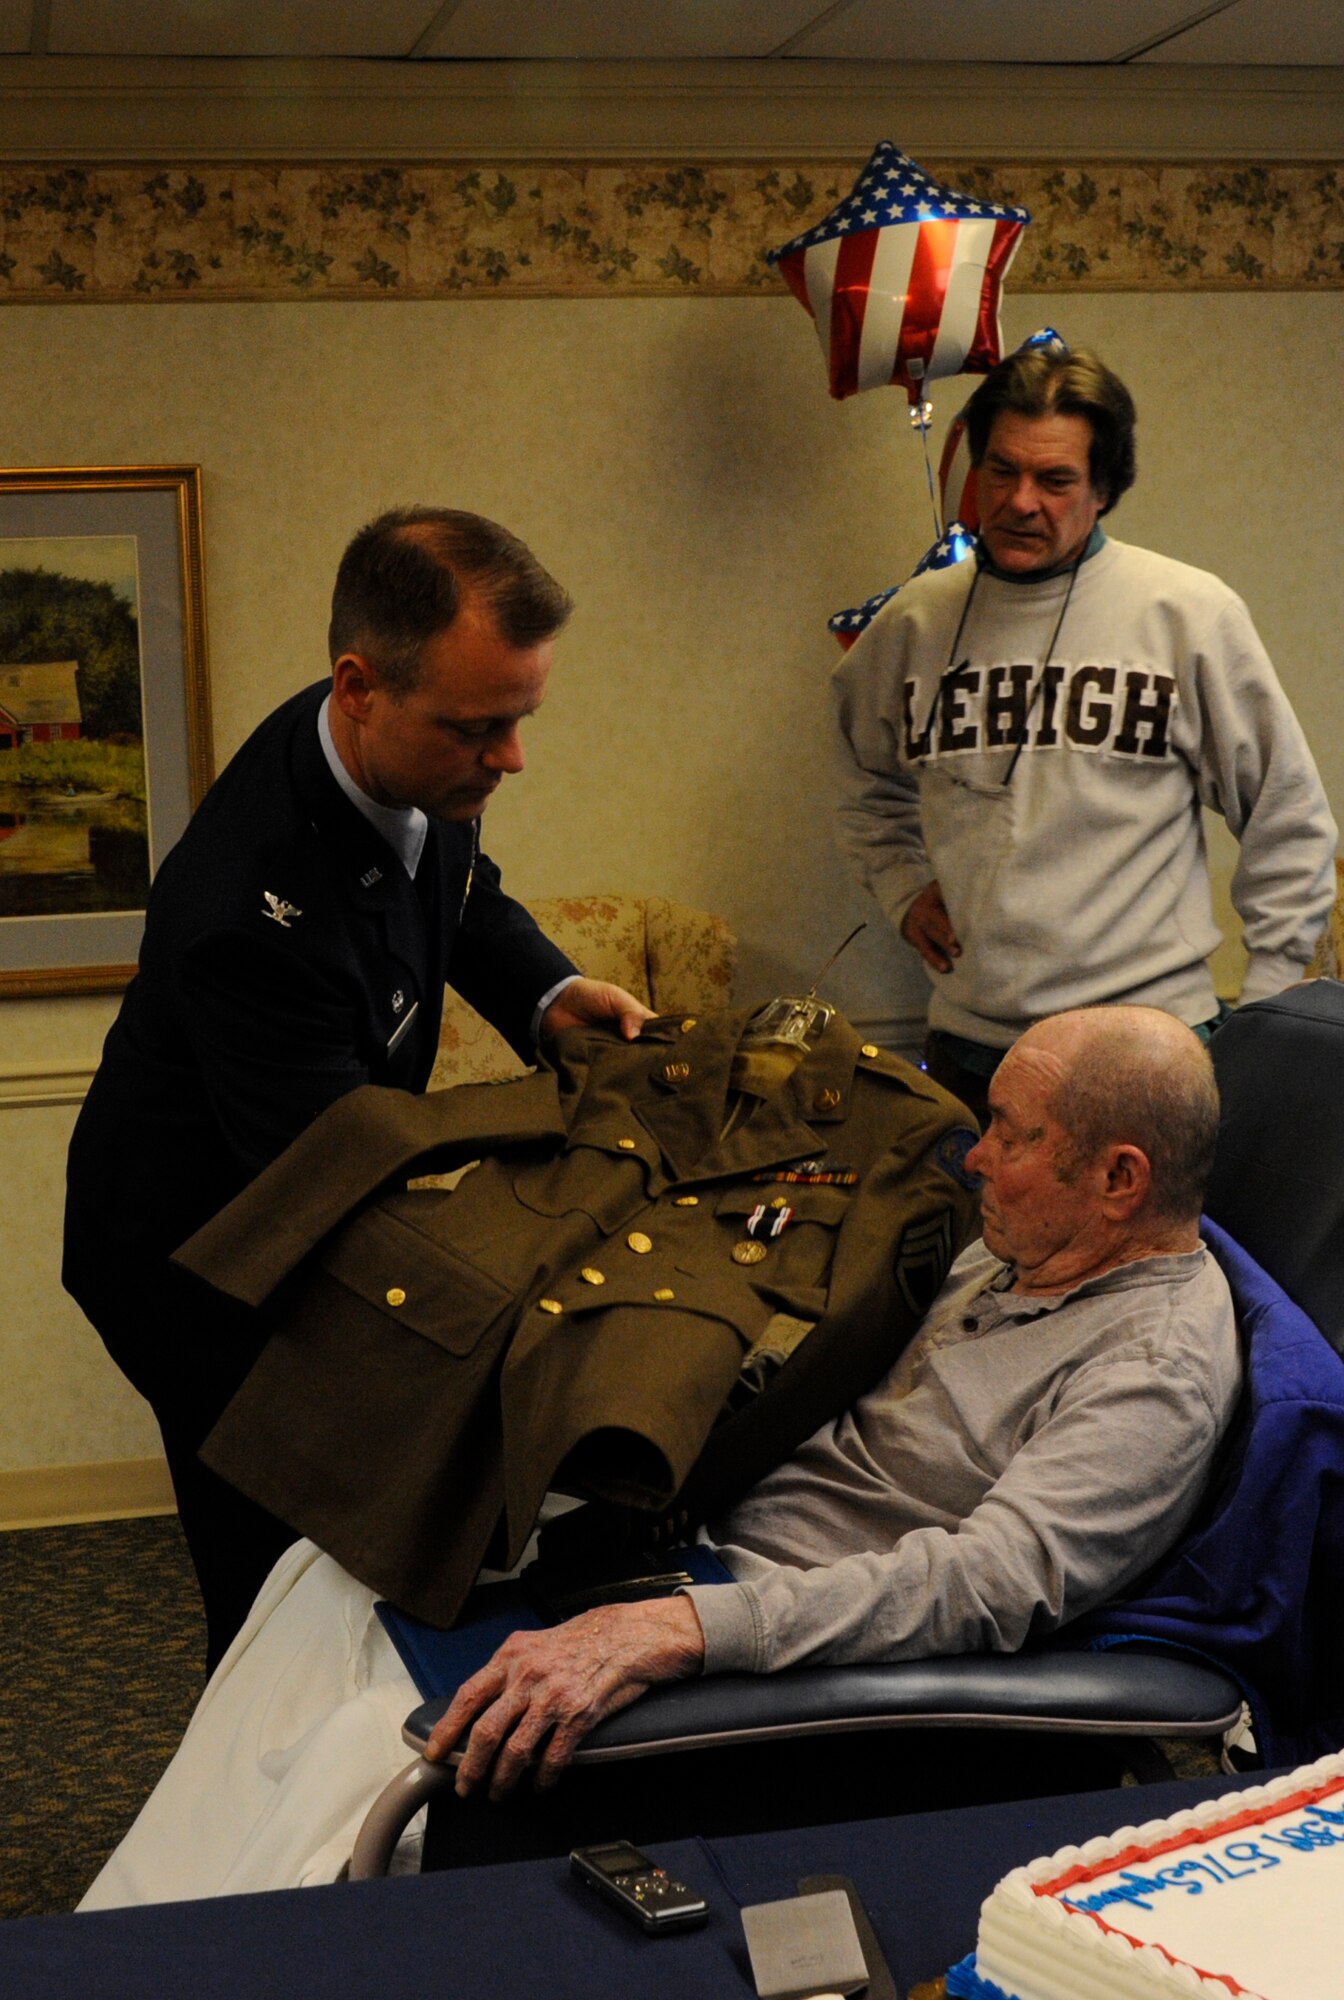 Air Force Col. James C. Hodges, Joint Base McGuire-Dix-Lakehurst and 87th Air Base Wing commander, displays former Army Air Force Staff Sgt. Kenneth E. Yousts’ (center) uniform during a Prisoner of War Medal presentation Jan. 27, 2014, at the Schuylkill Center Nursing Home, Pottsville, Pa. The POW medal was presented to Youst seven decades later after his internment in a Swiss prison during World War II. (U.S. Air Force photo by Pascual Flores) 